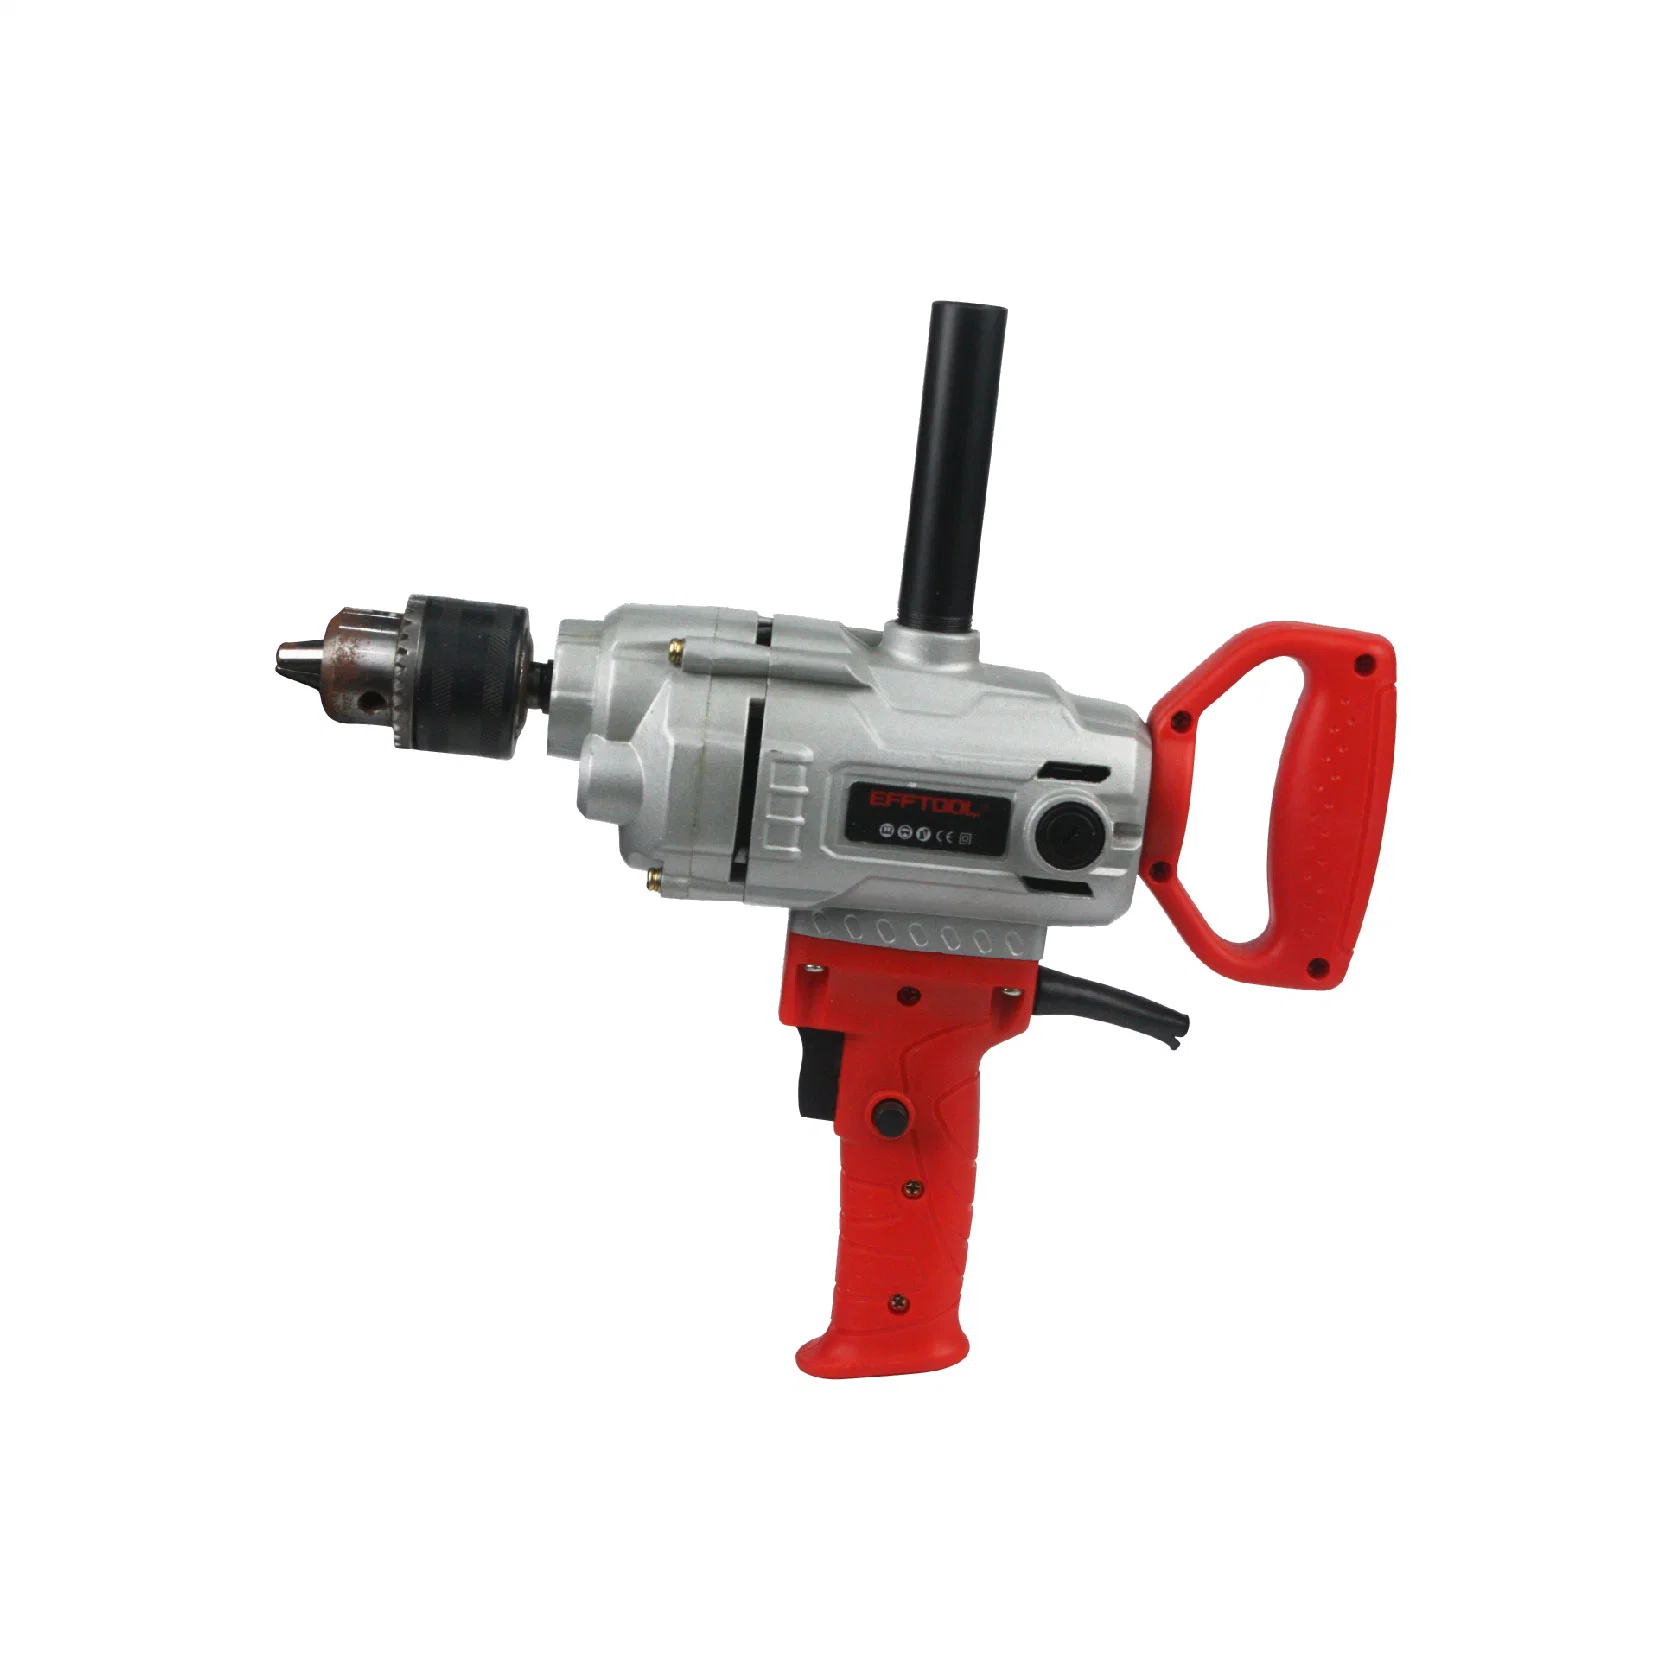 Efftool 800W Durable Power Drill Impact Drill Electric Power Drilling Tools